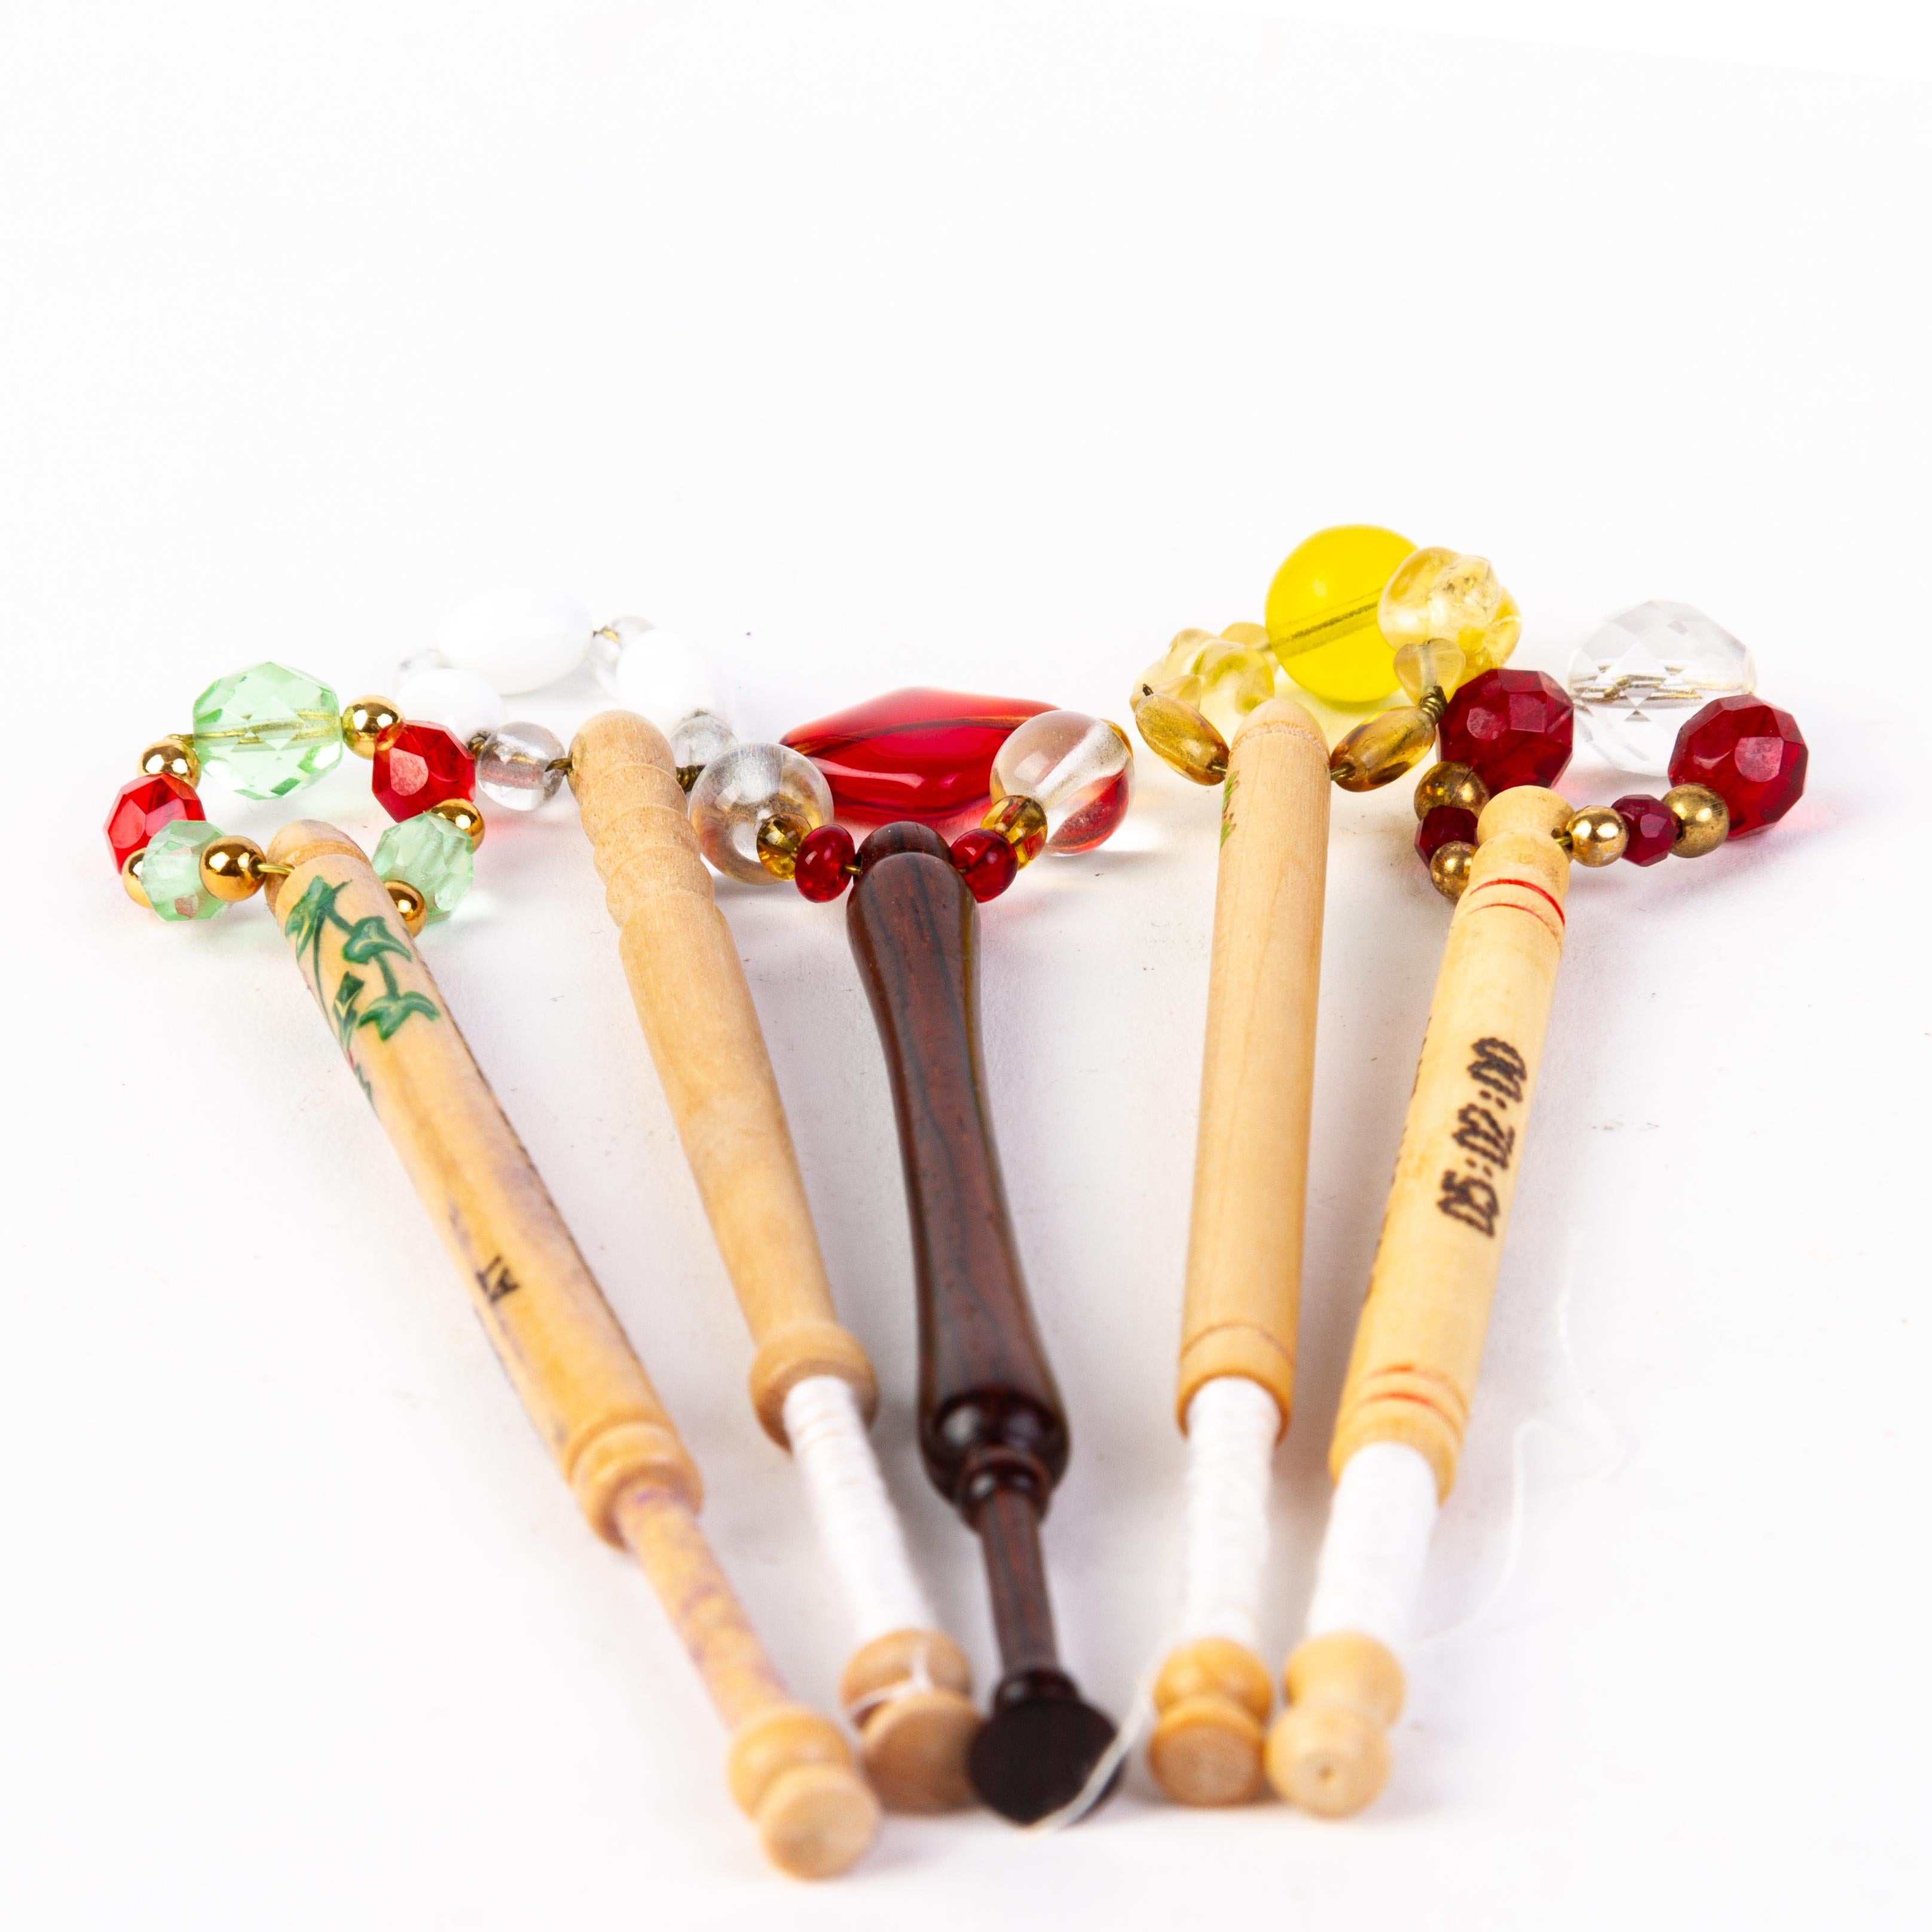 Victorian Wood Lace Bobbins with Glass Beads (x5) For Sale 2